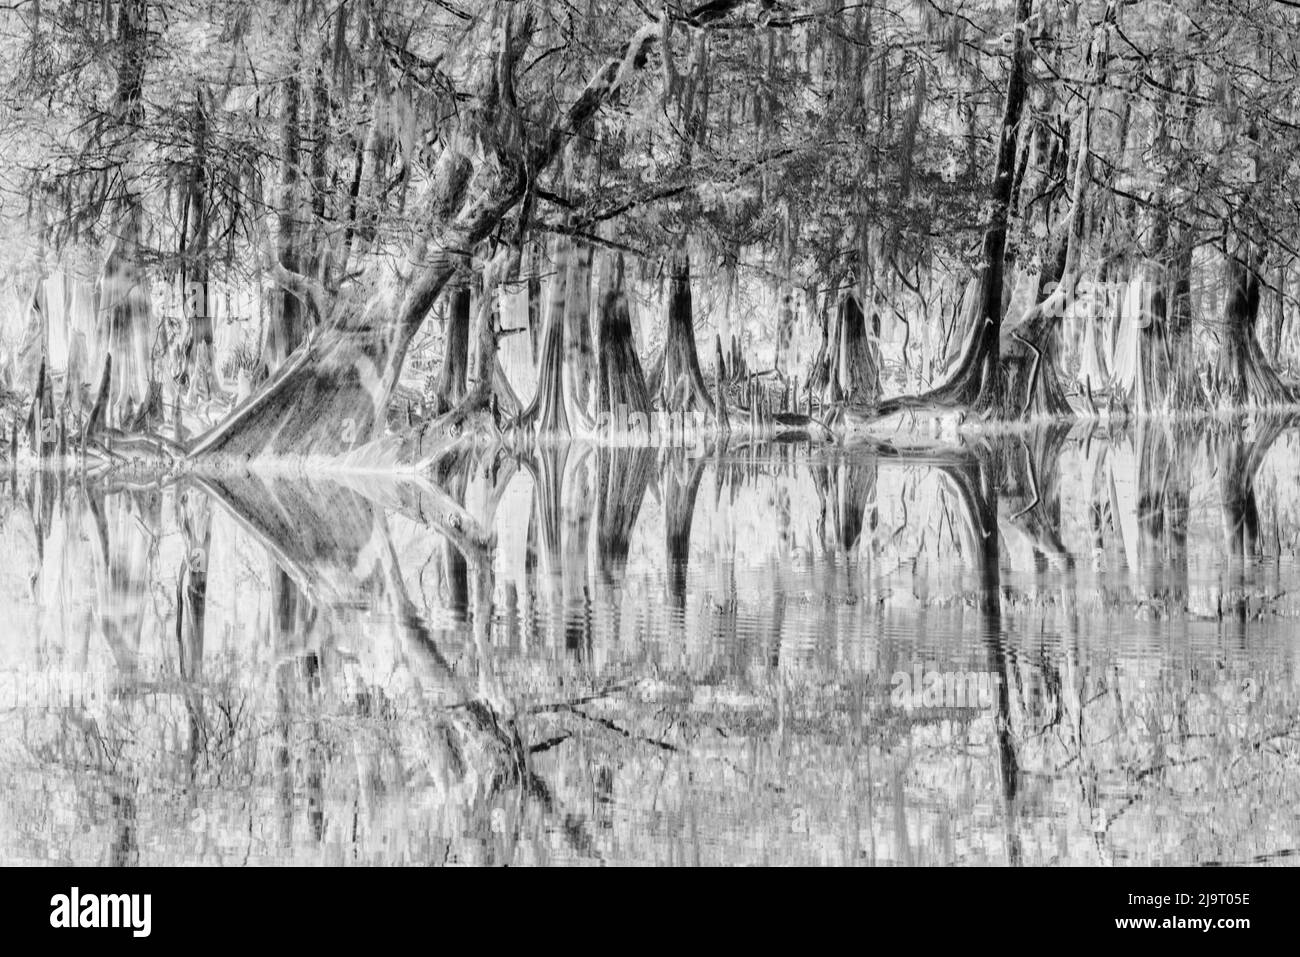 Early spring view of cypress trees reflecting on blackwater area of St. Johns River, central Florida. Stock Photo